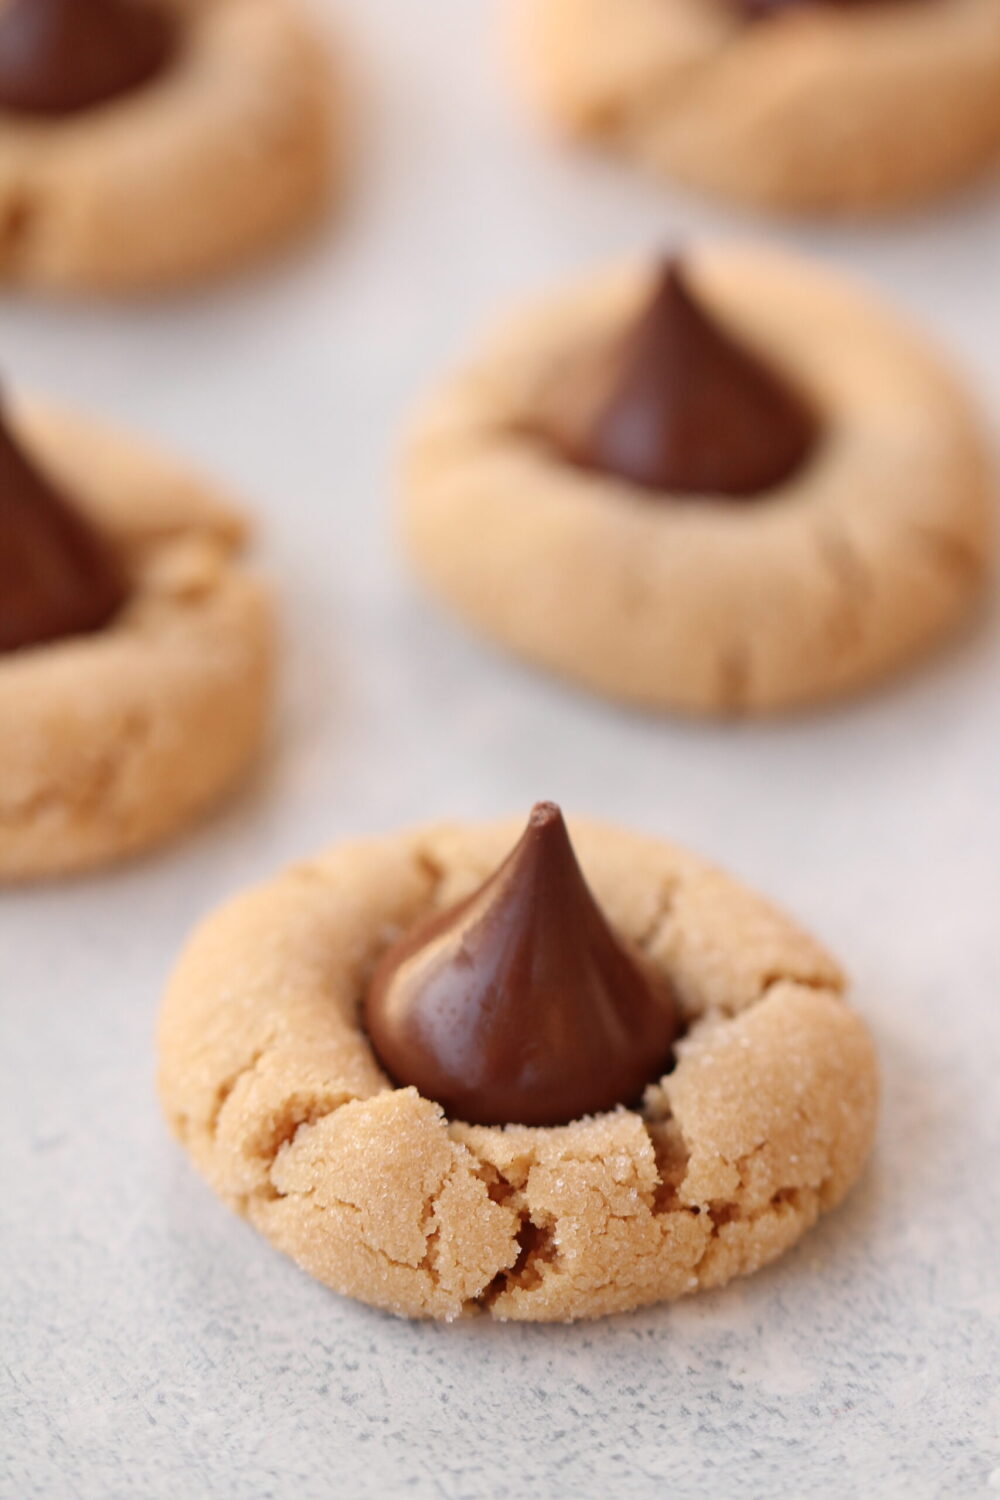 Classic Peanut Butter Blossoms (Hershey Kiss Cookies) Recipe